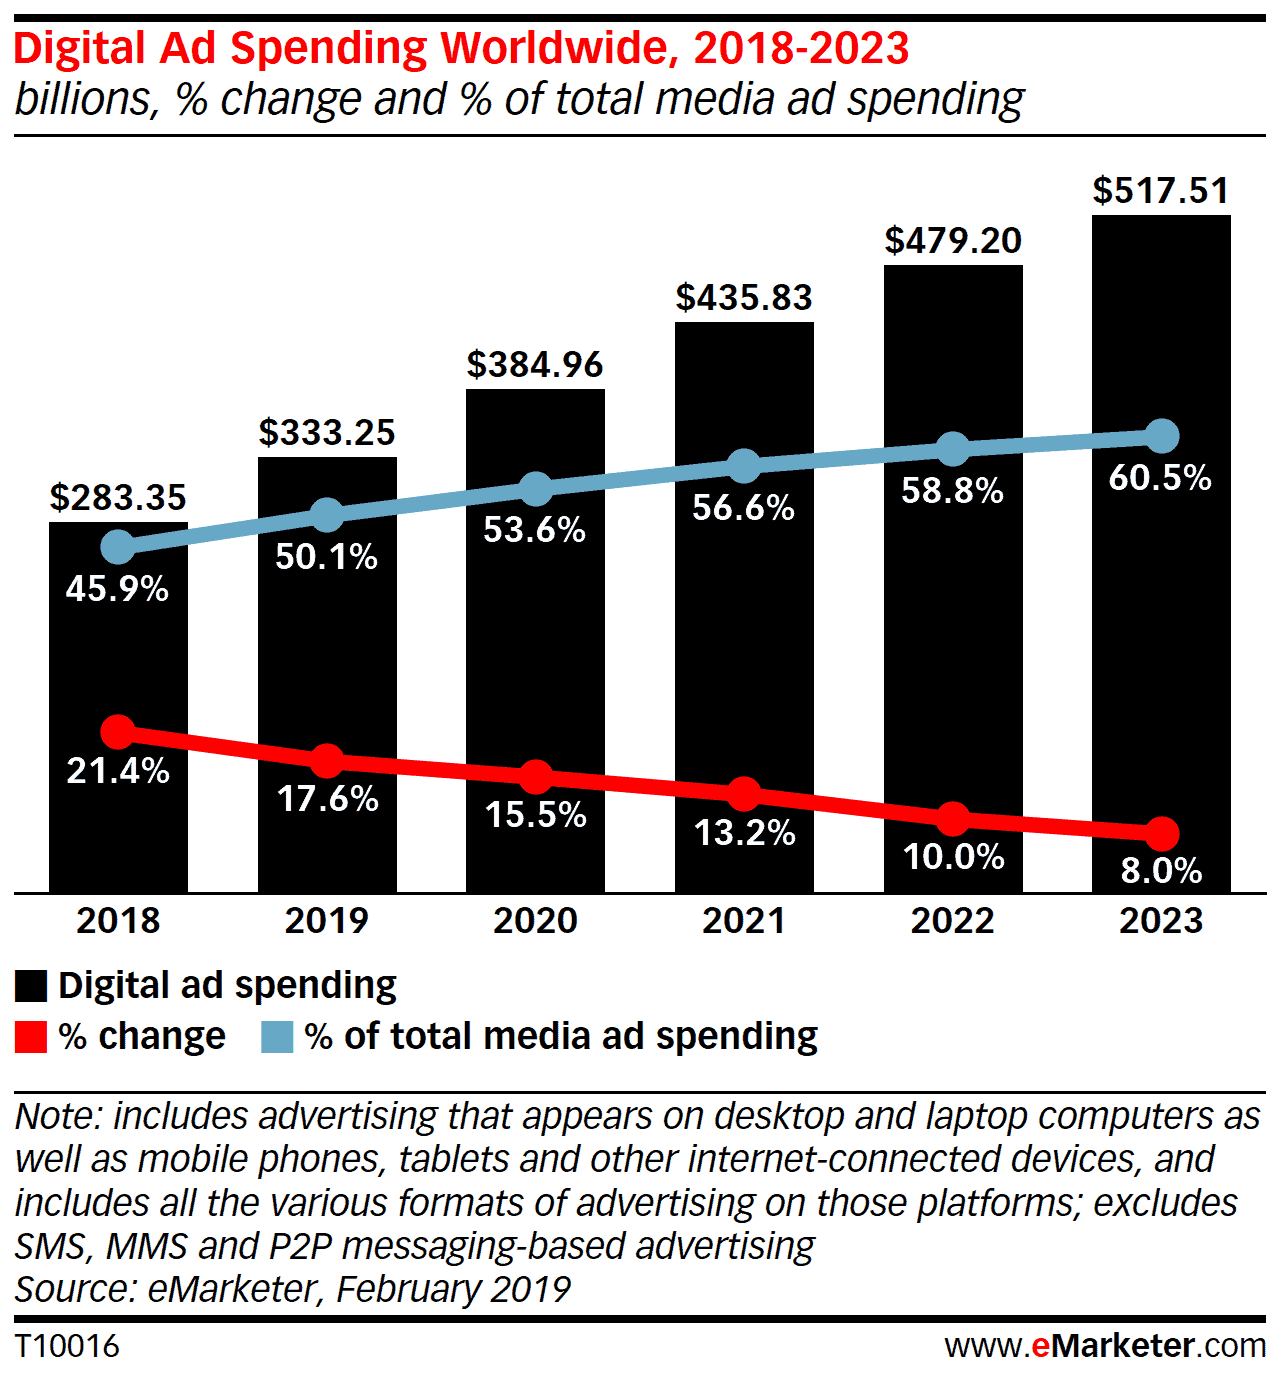 Global Ad Spend 2018-2023